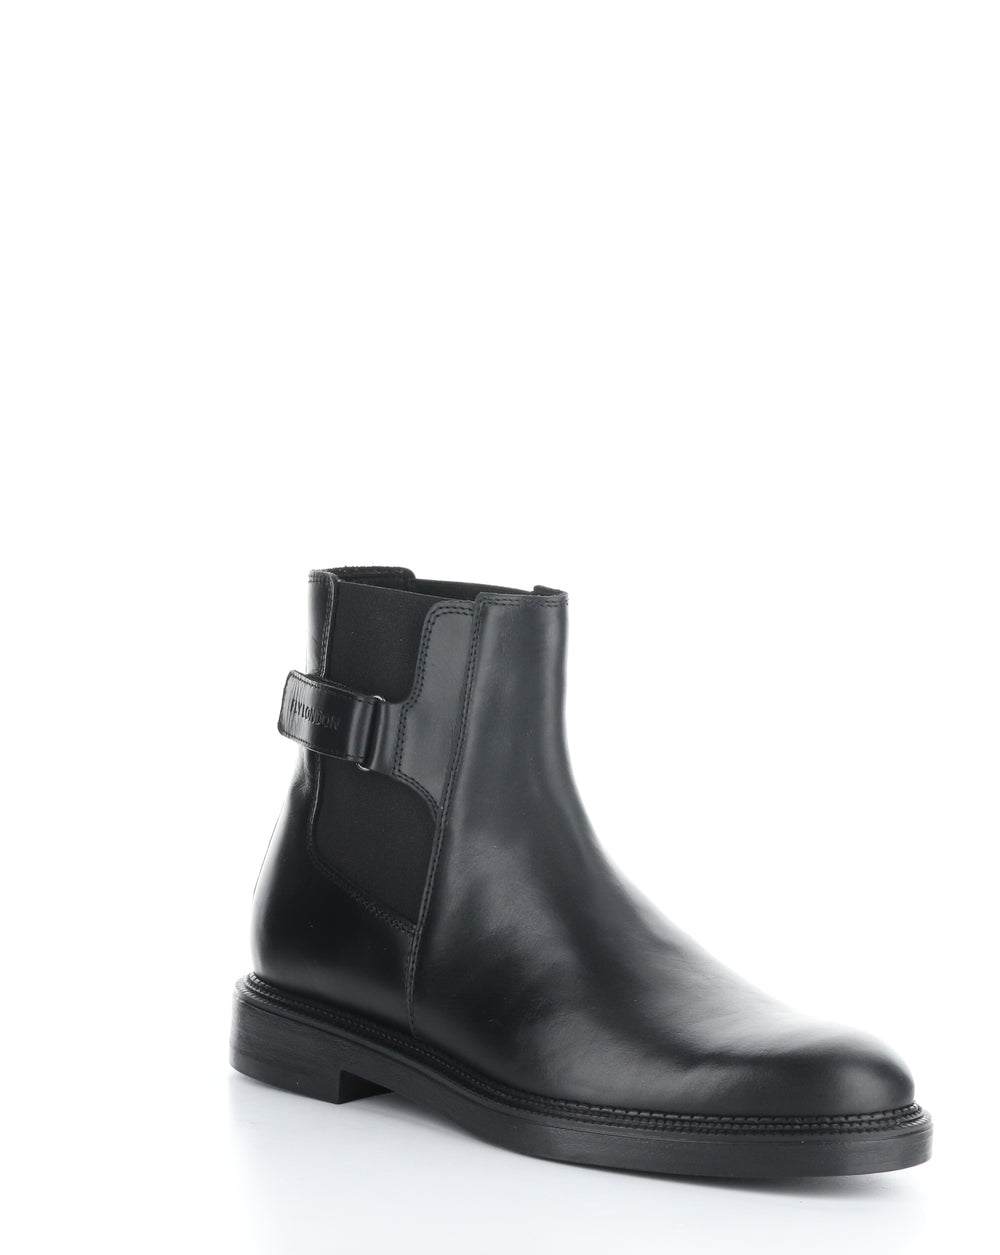 VLAD998FLY 000 BLACK Elasticated Boots